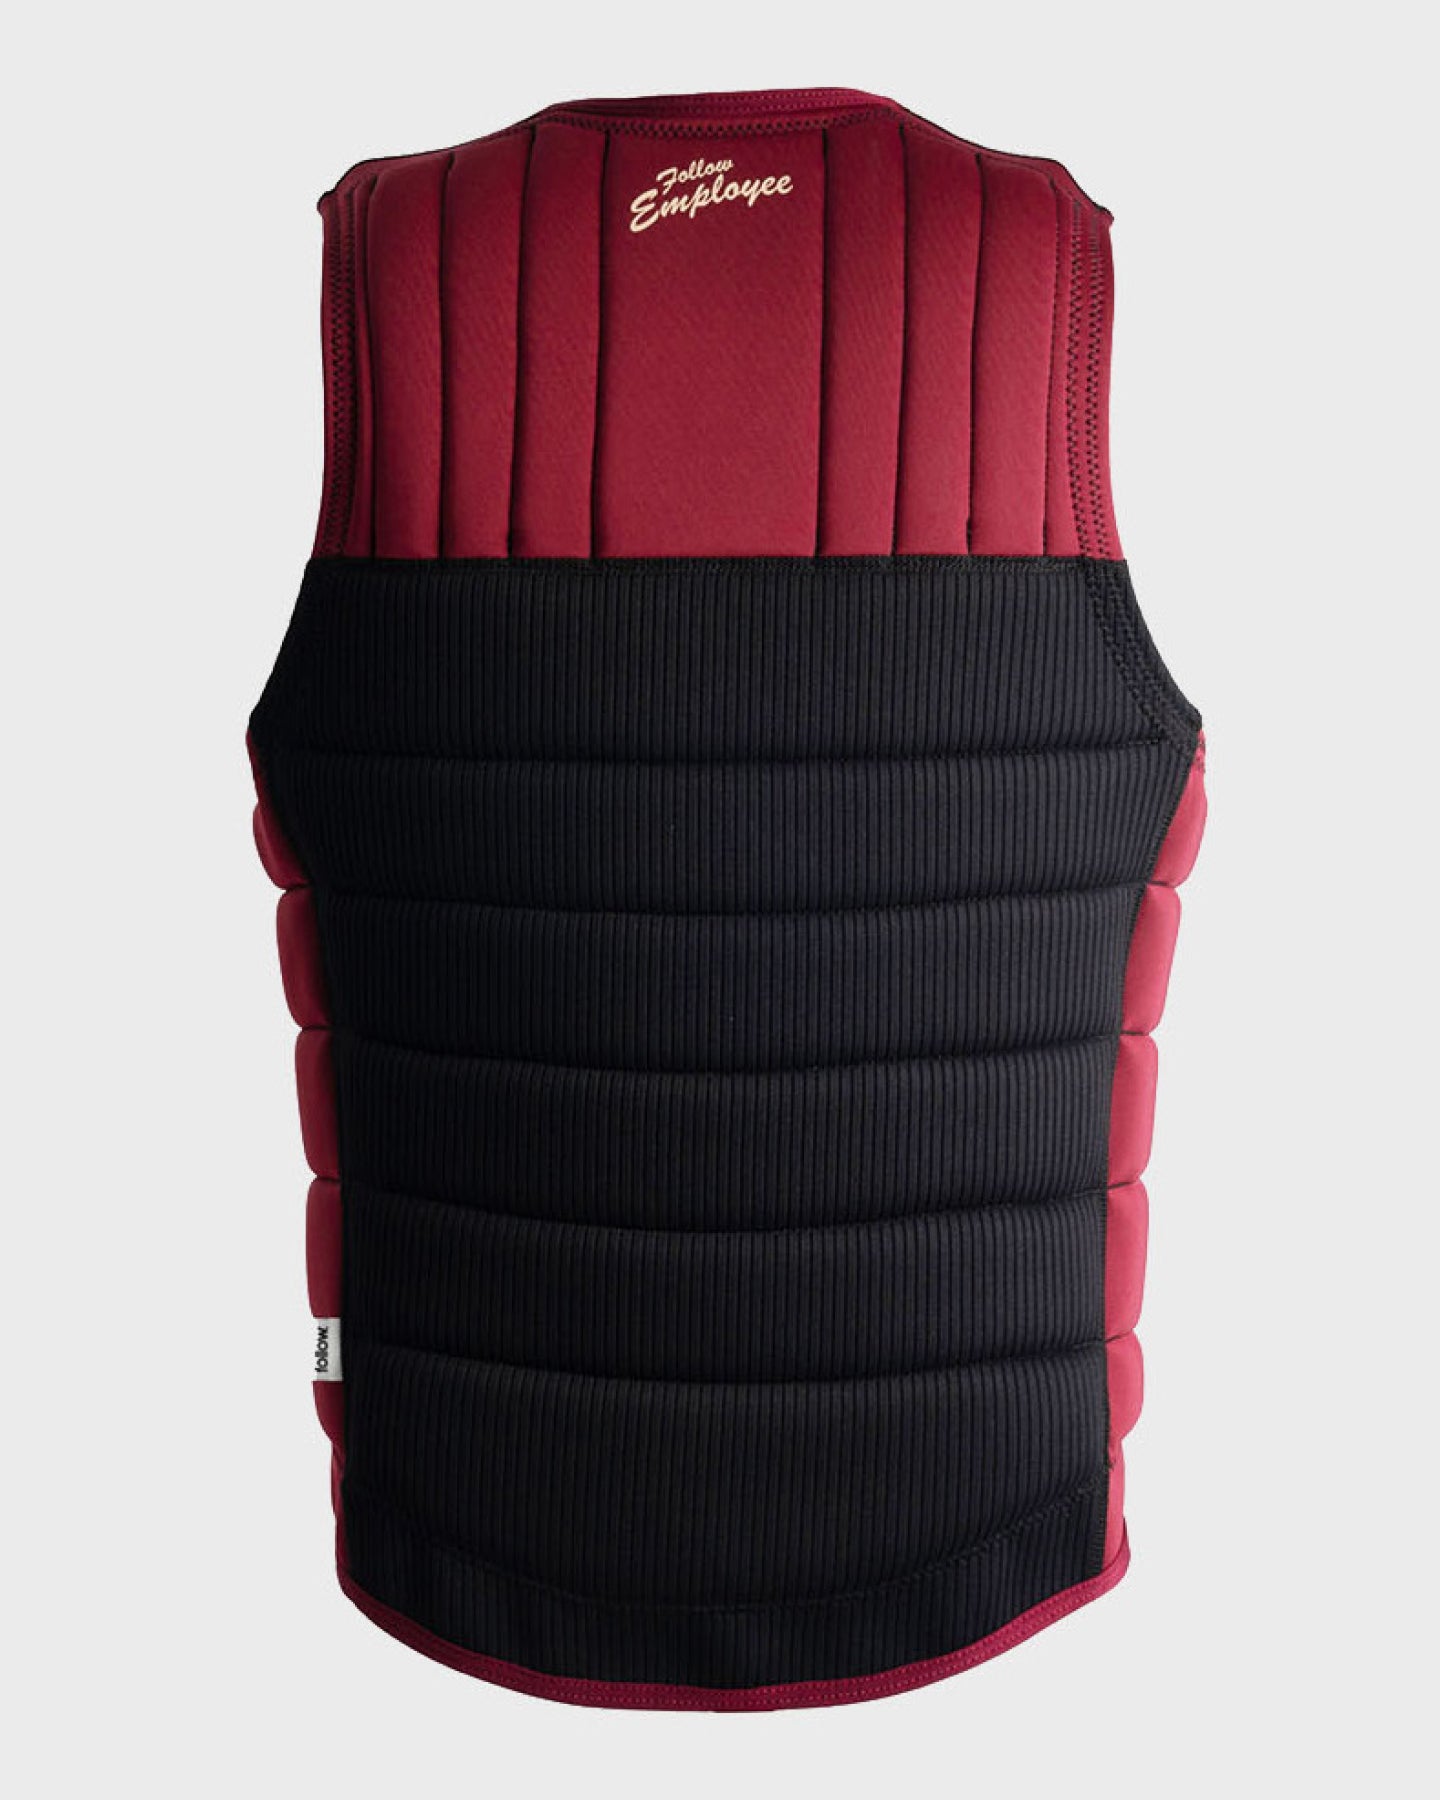 Follow Employee of the Month Impact- Black/Maroon Back